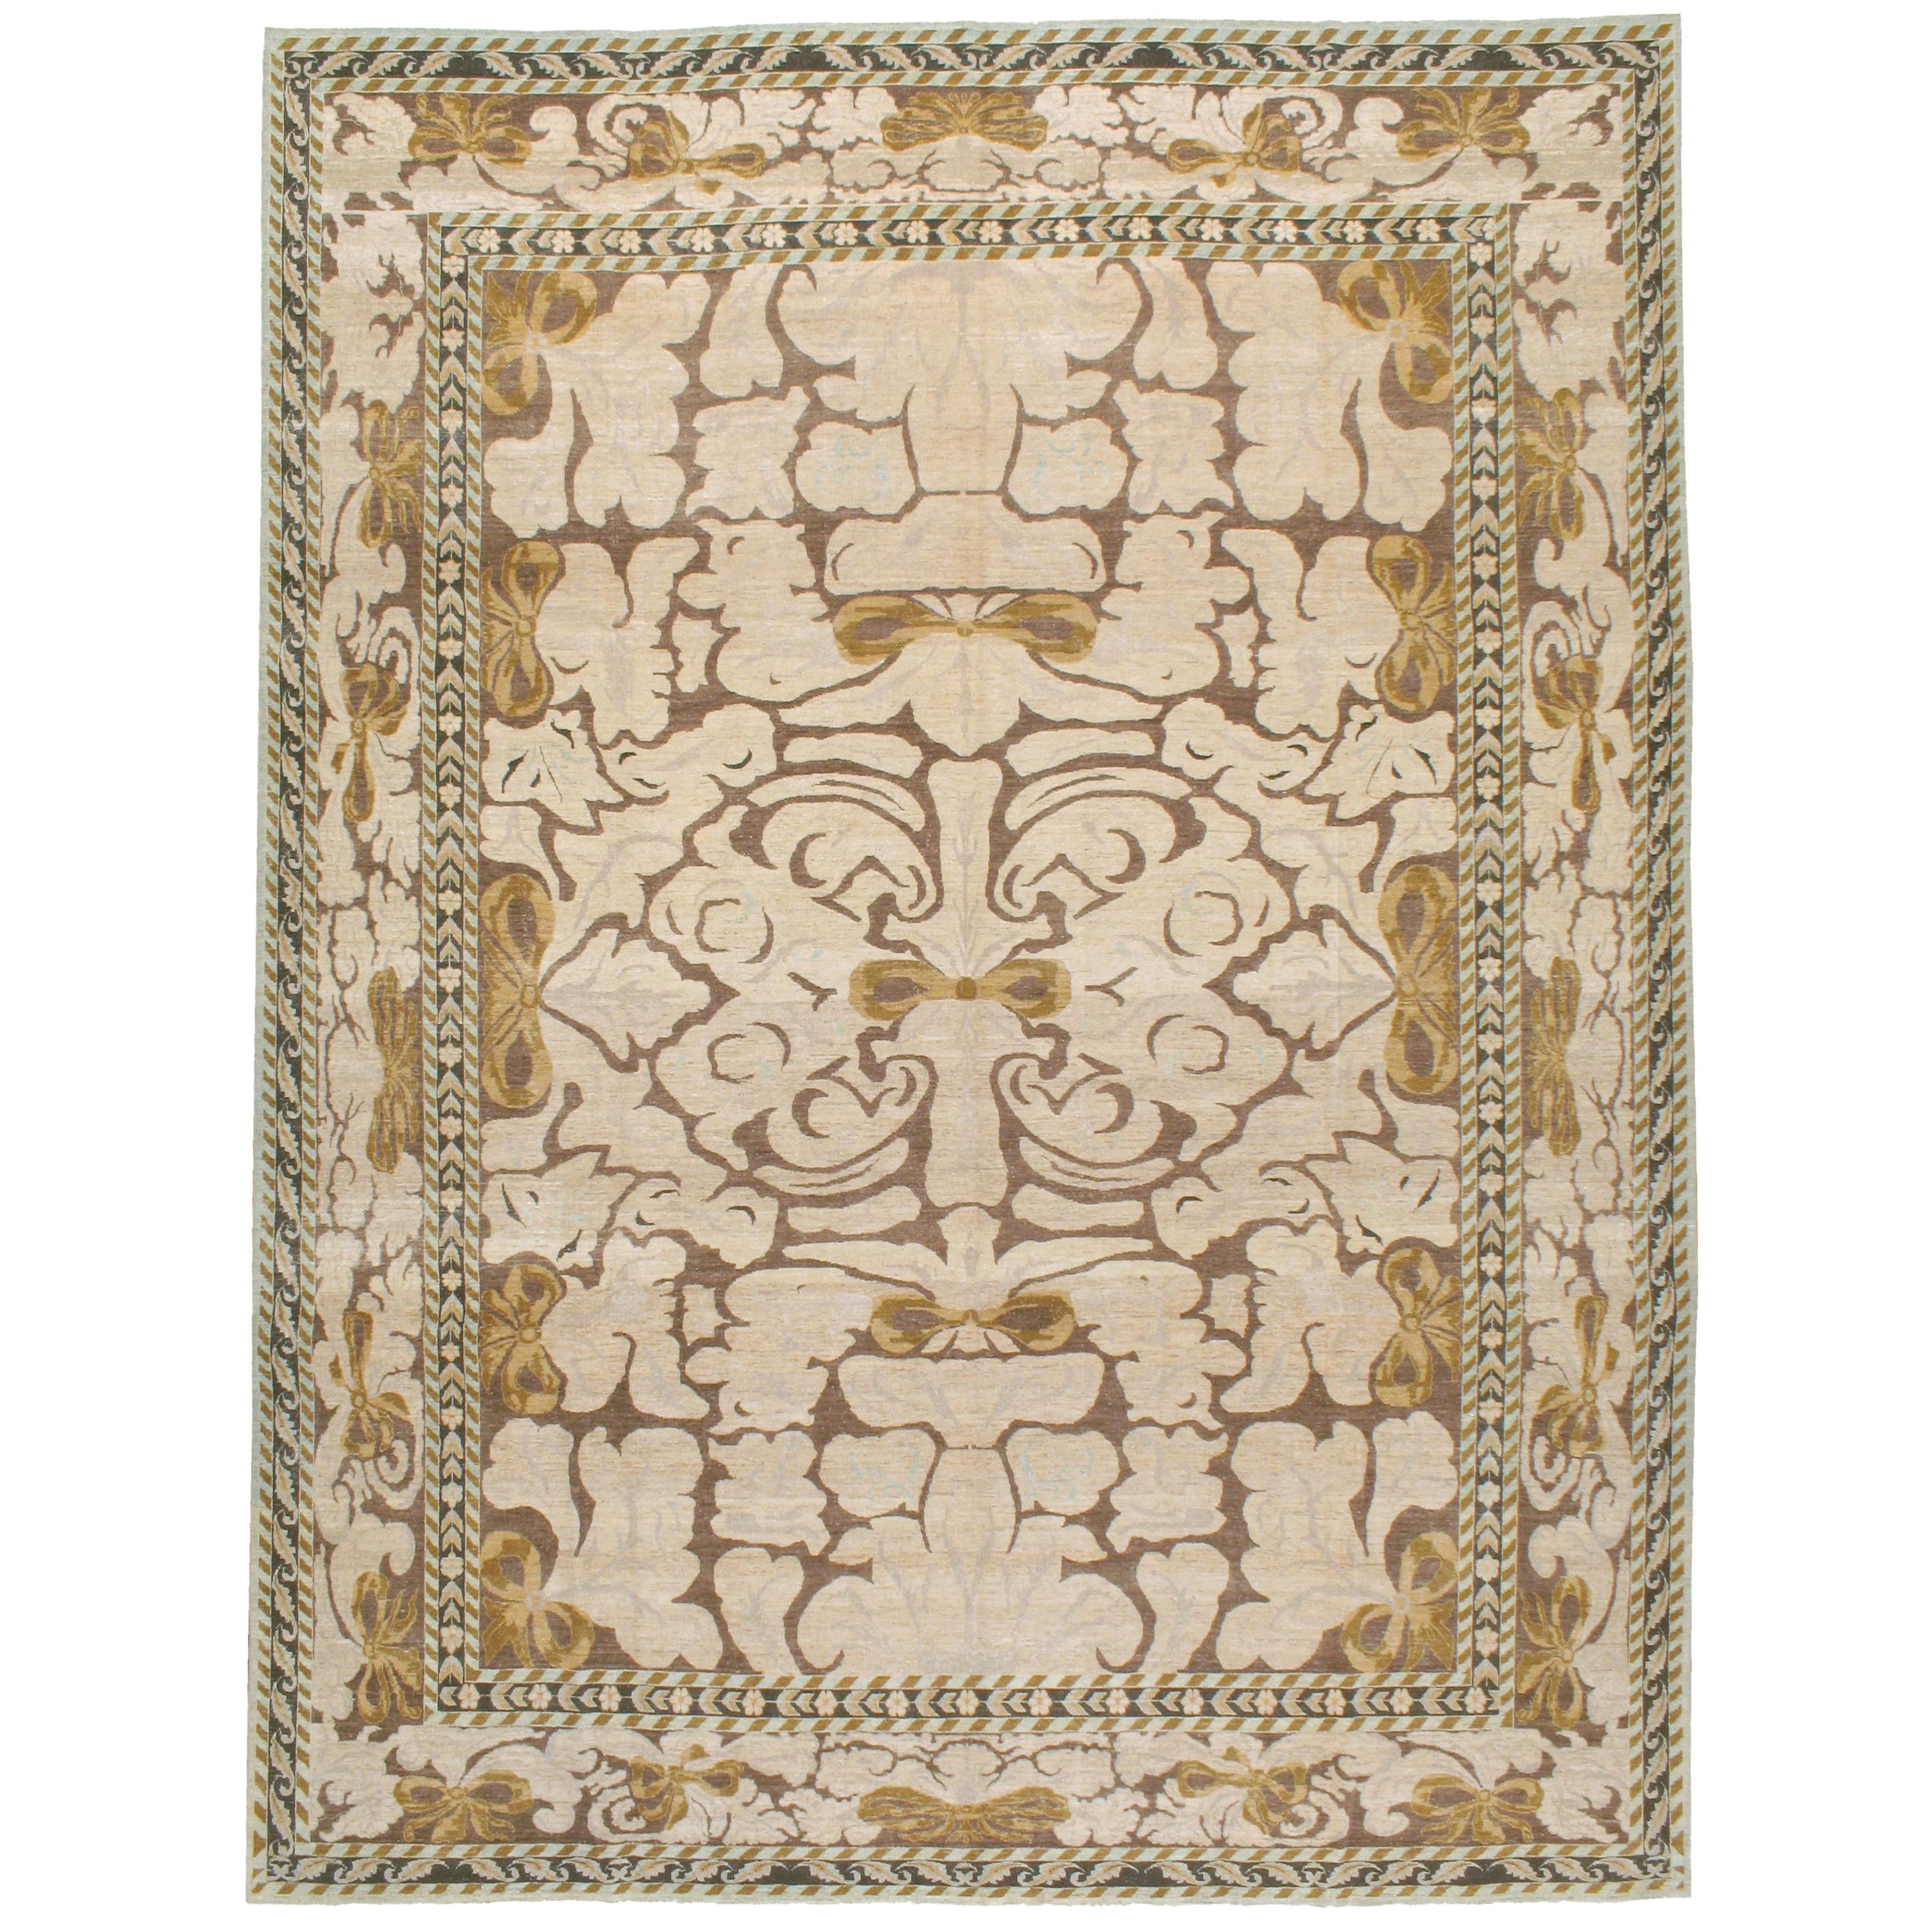 Contemporary Handmade Persian Room Size Carpet In Viennese Secession Style